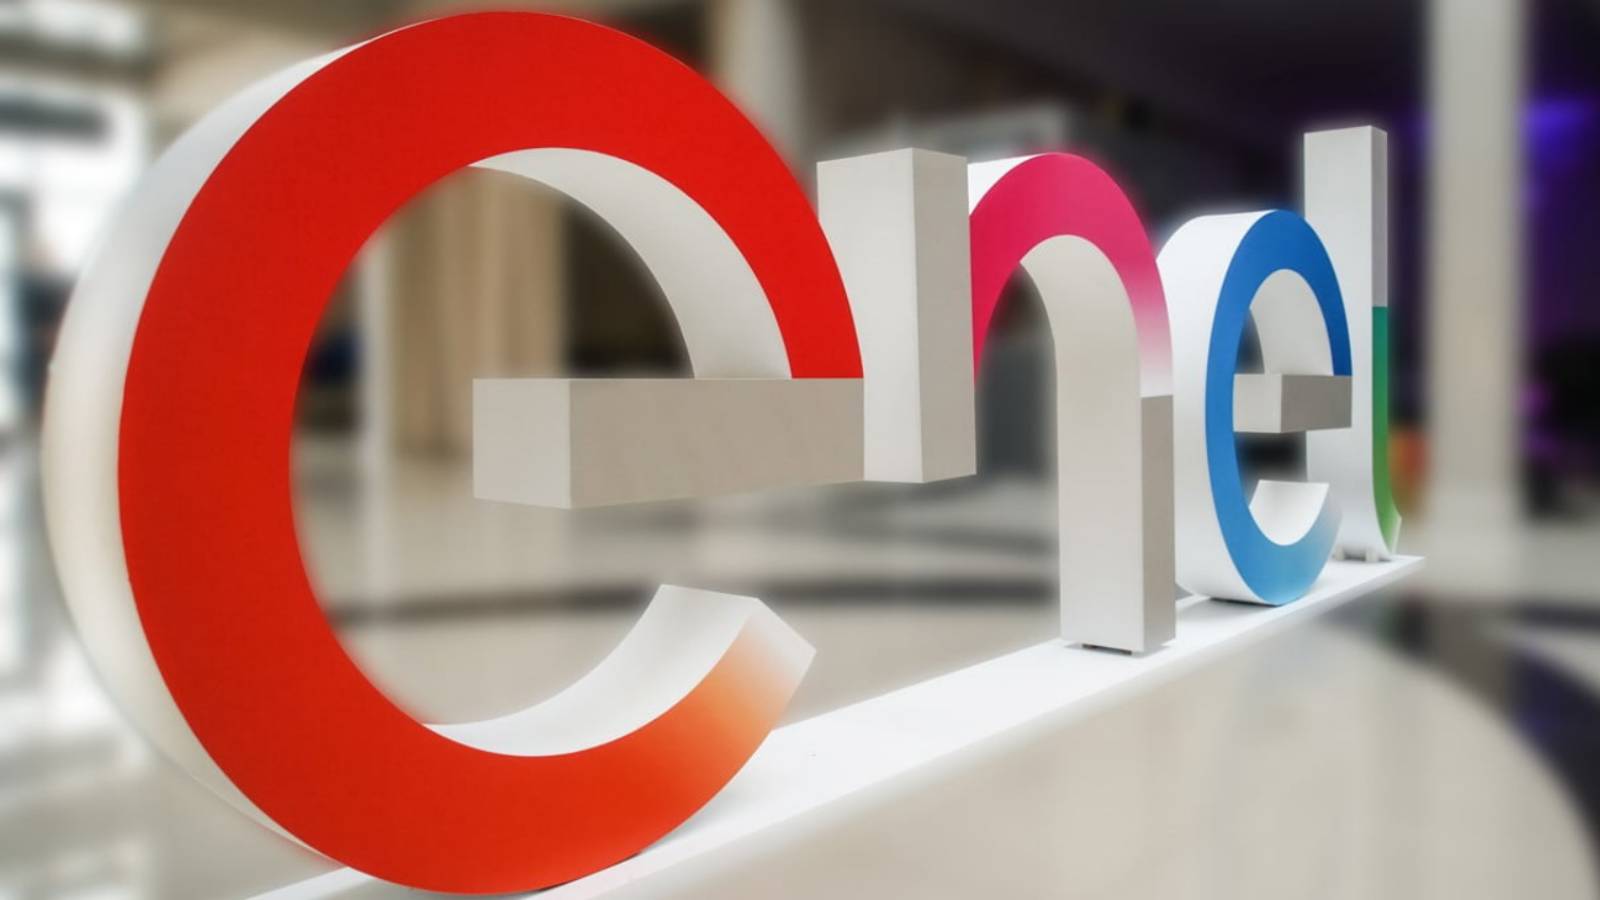 ENEL WARNING IMPORTANT Information Issued to Romanian Customers